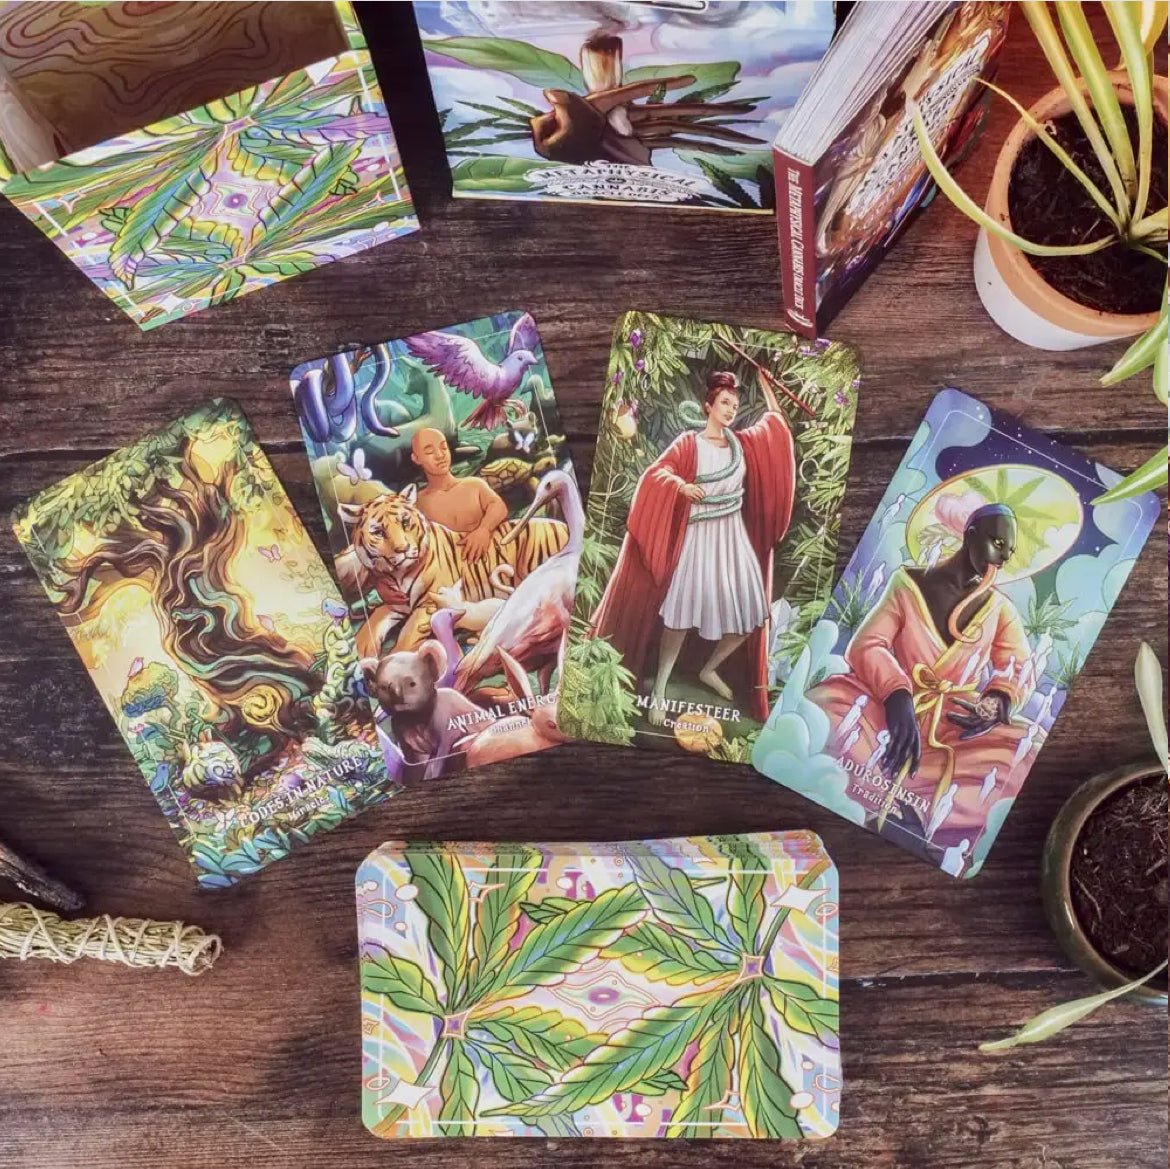 ‘Metaphysical Cannabis’ Oracle Deck - EcoLuxe Furnishings